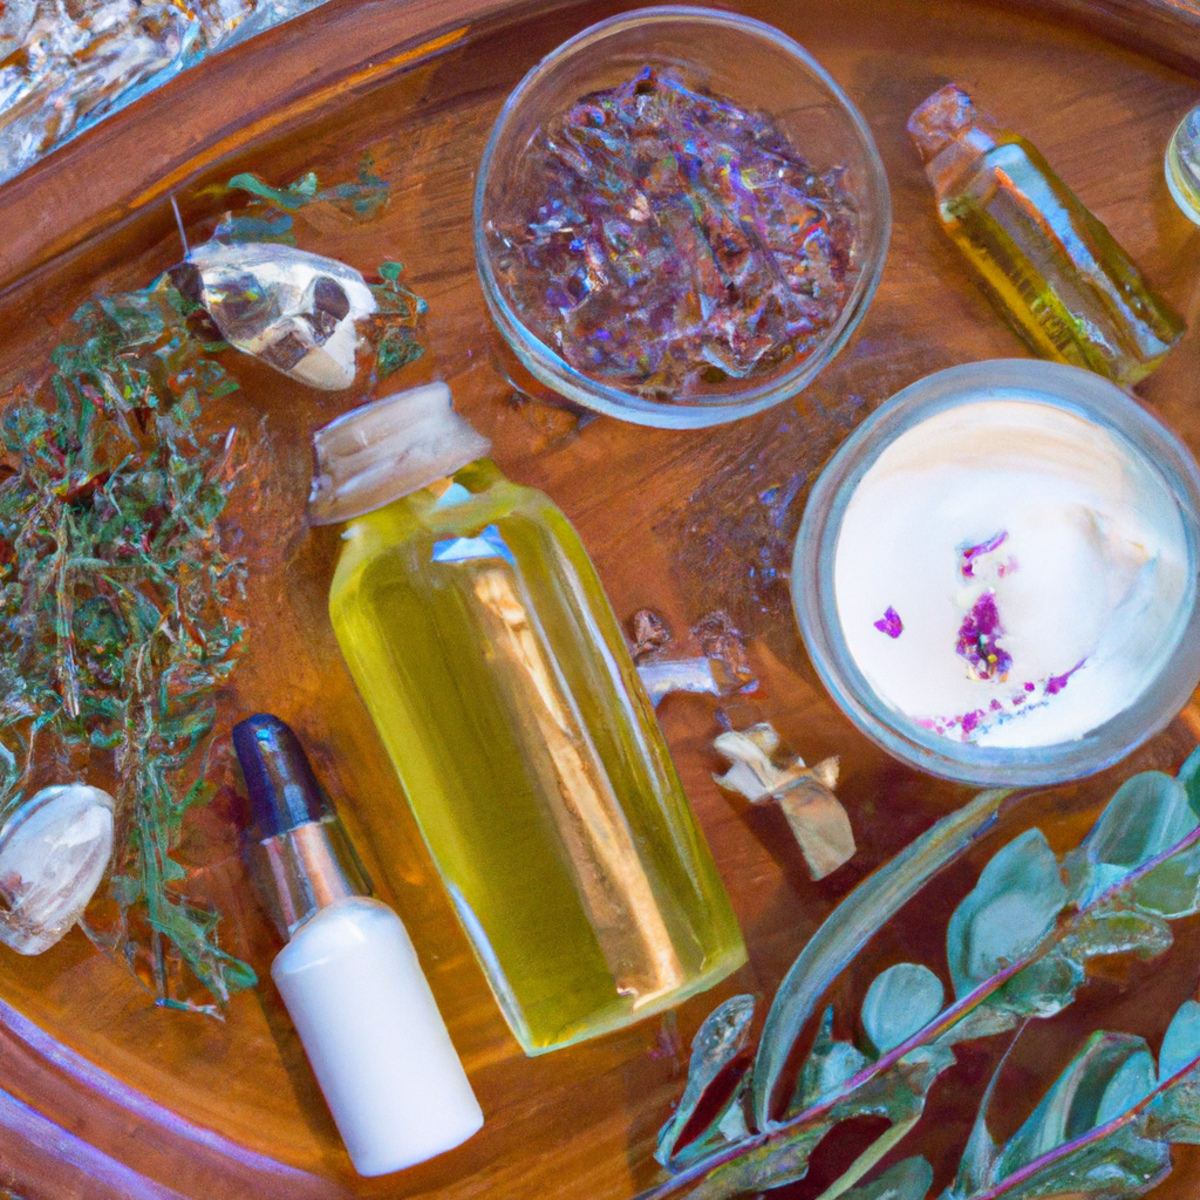 Get ready to glow with these natural skin care routines! From lavender to rosehip, this wooden tray is a treasure trove of organic goodness. With shea butter and coconut oil to nourish and fresh herbs to invigorate, your skin will thank you for going au naturel.